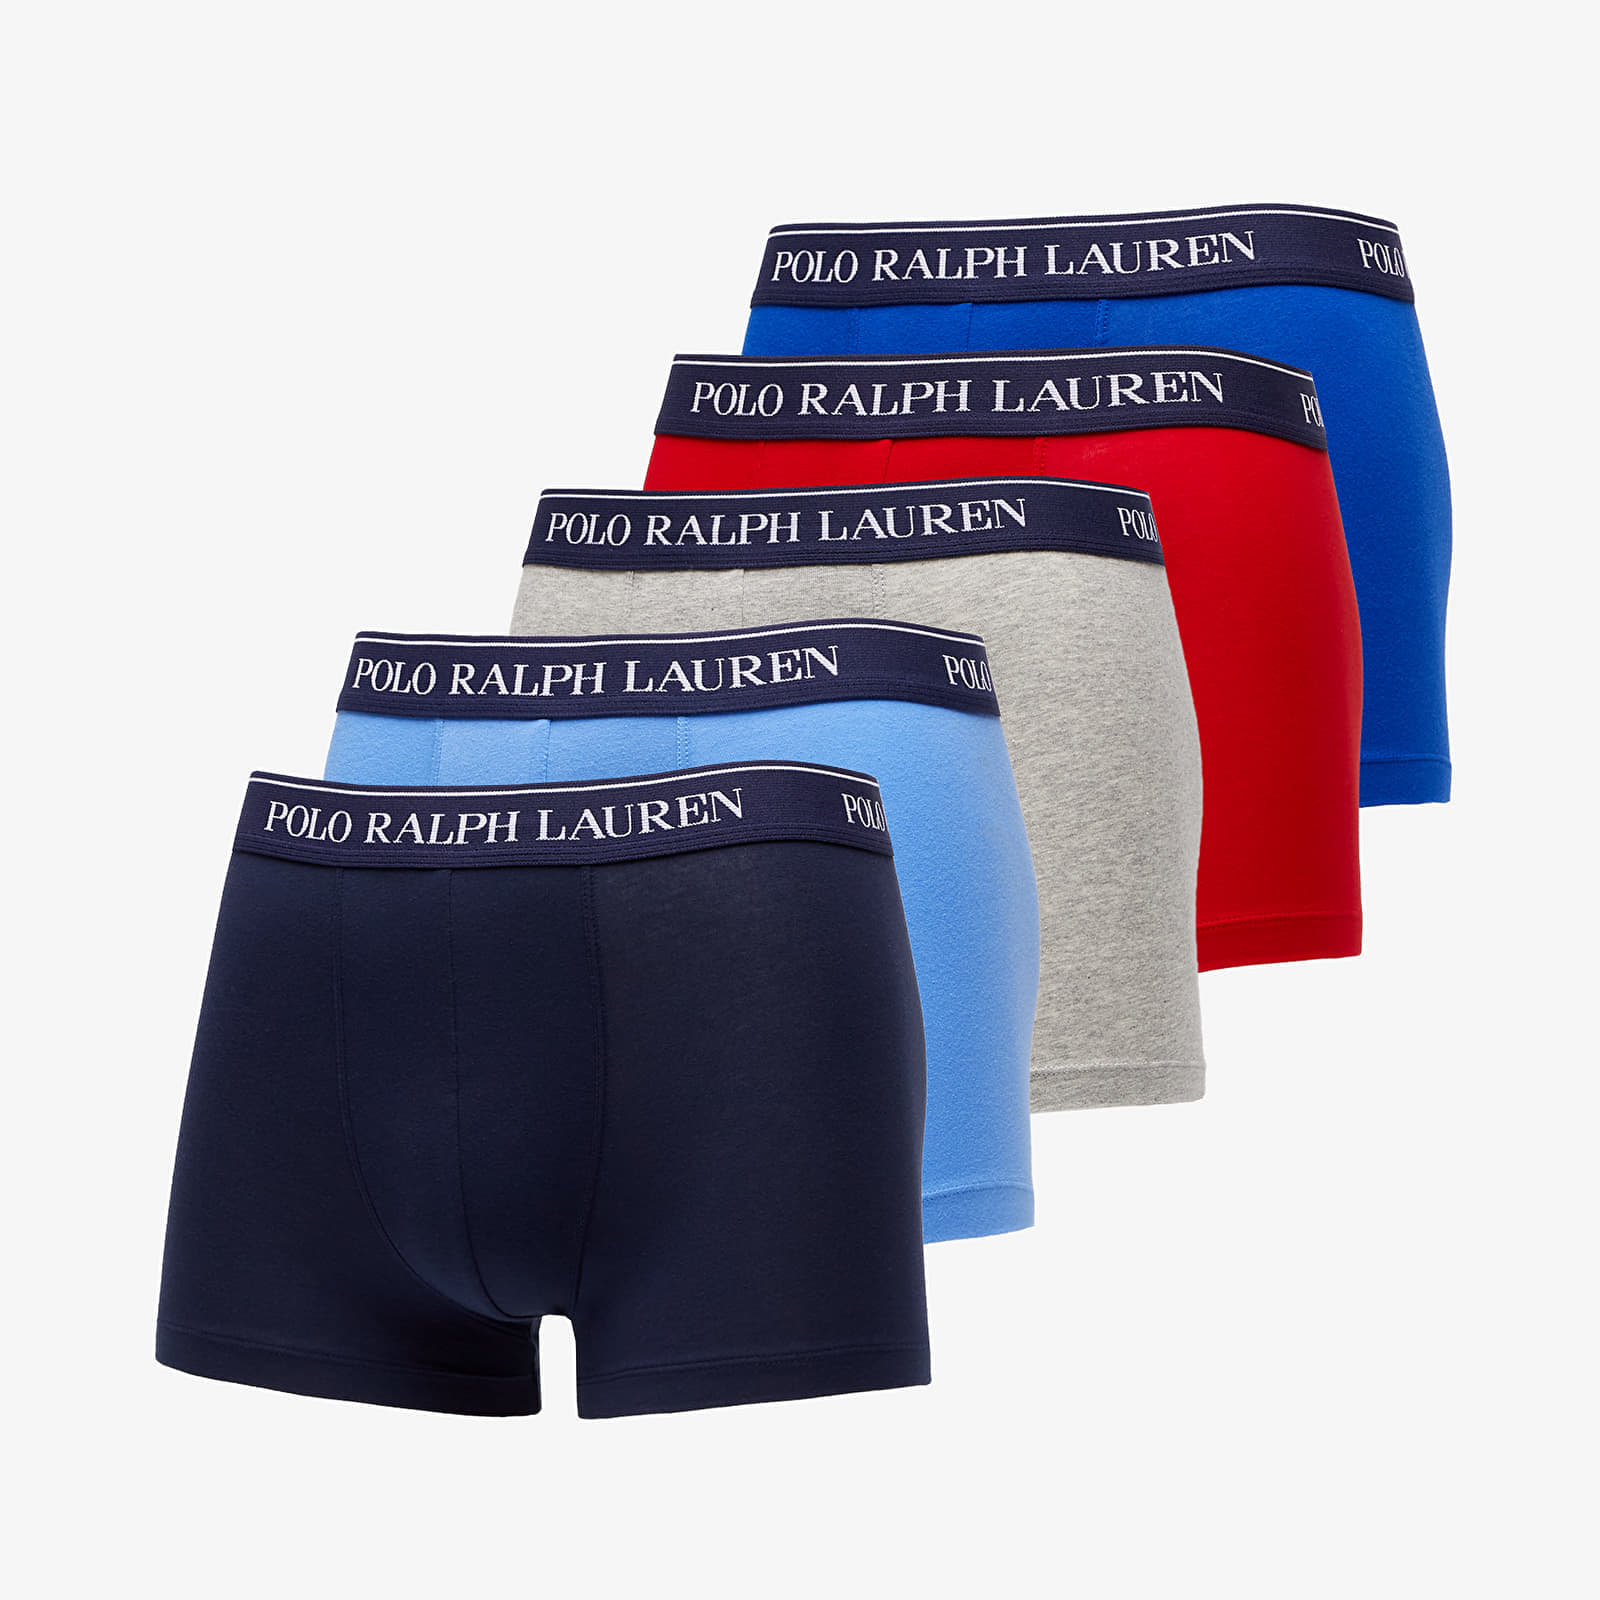 Boxer shorts Polo Ralph Lauren Stretch Cotton Classic Trunk 5-Pack Red/ Grey/ Royal Game/ Blue/ Navy